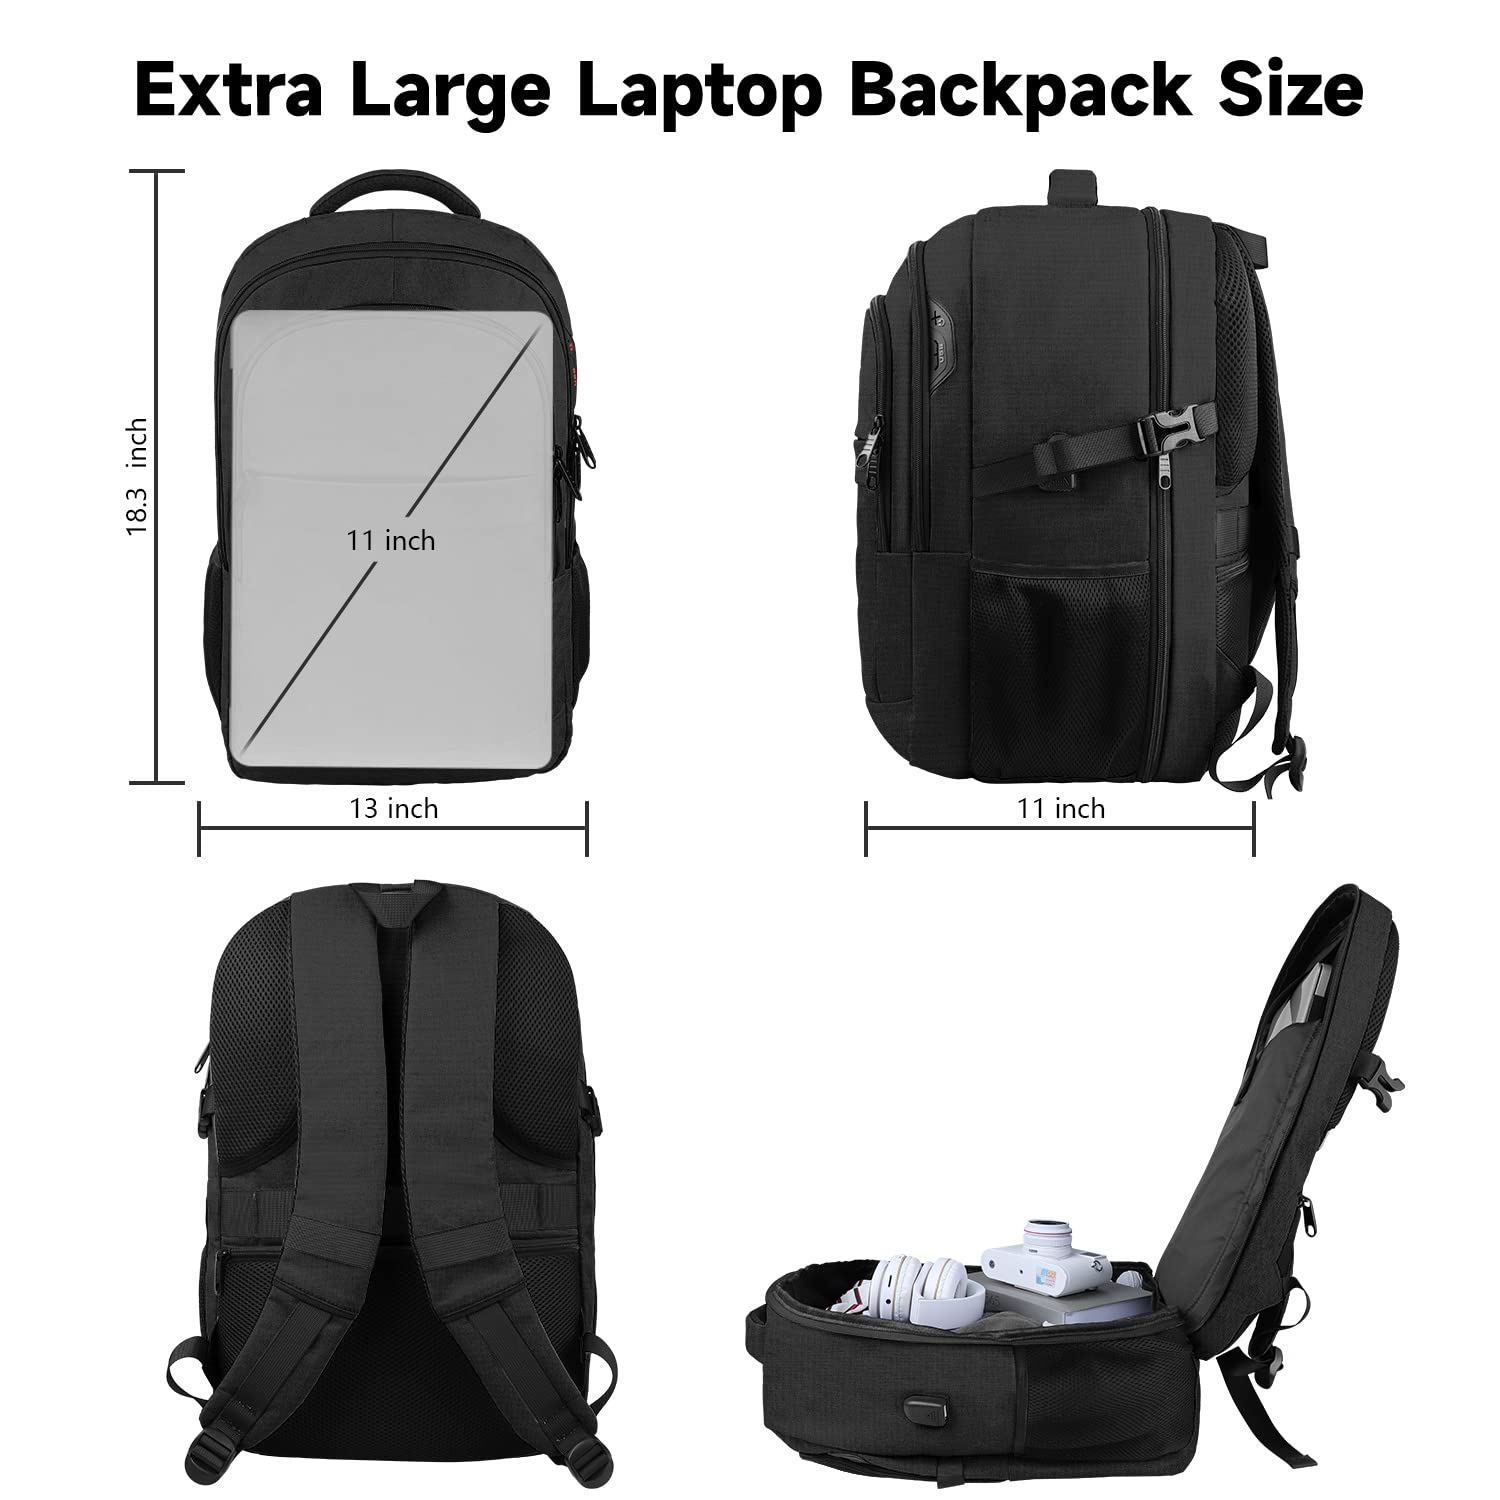 Lapsouno Large Travel Backpack, Laptop Backpack, Carry on Backpack, Durable Extra Large 17 Inch TSA Friendly Business Travel Laptop Backpack with USB Port, Anti Theft Bag Gifts for Men Women, Black